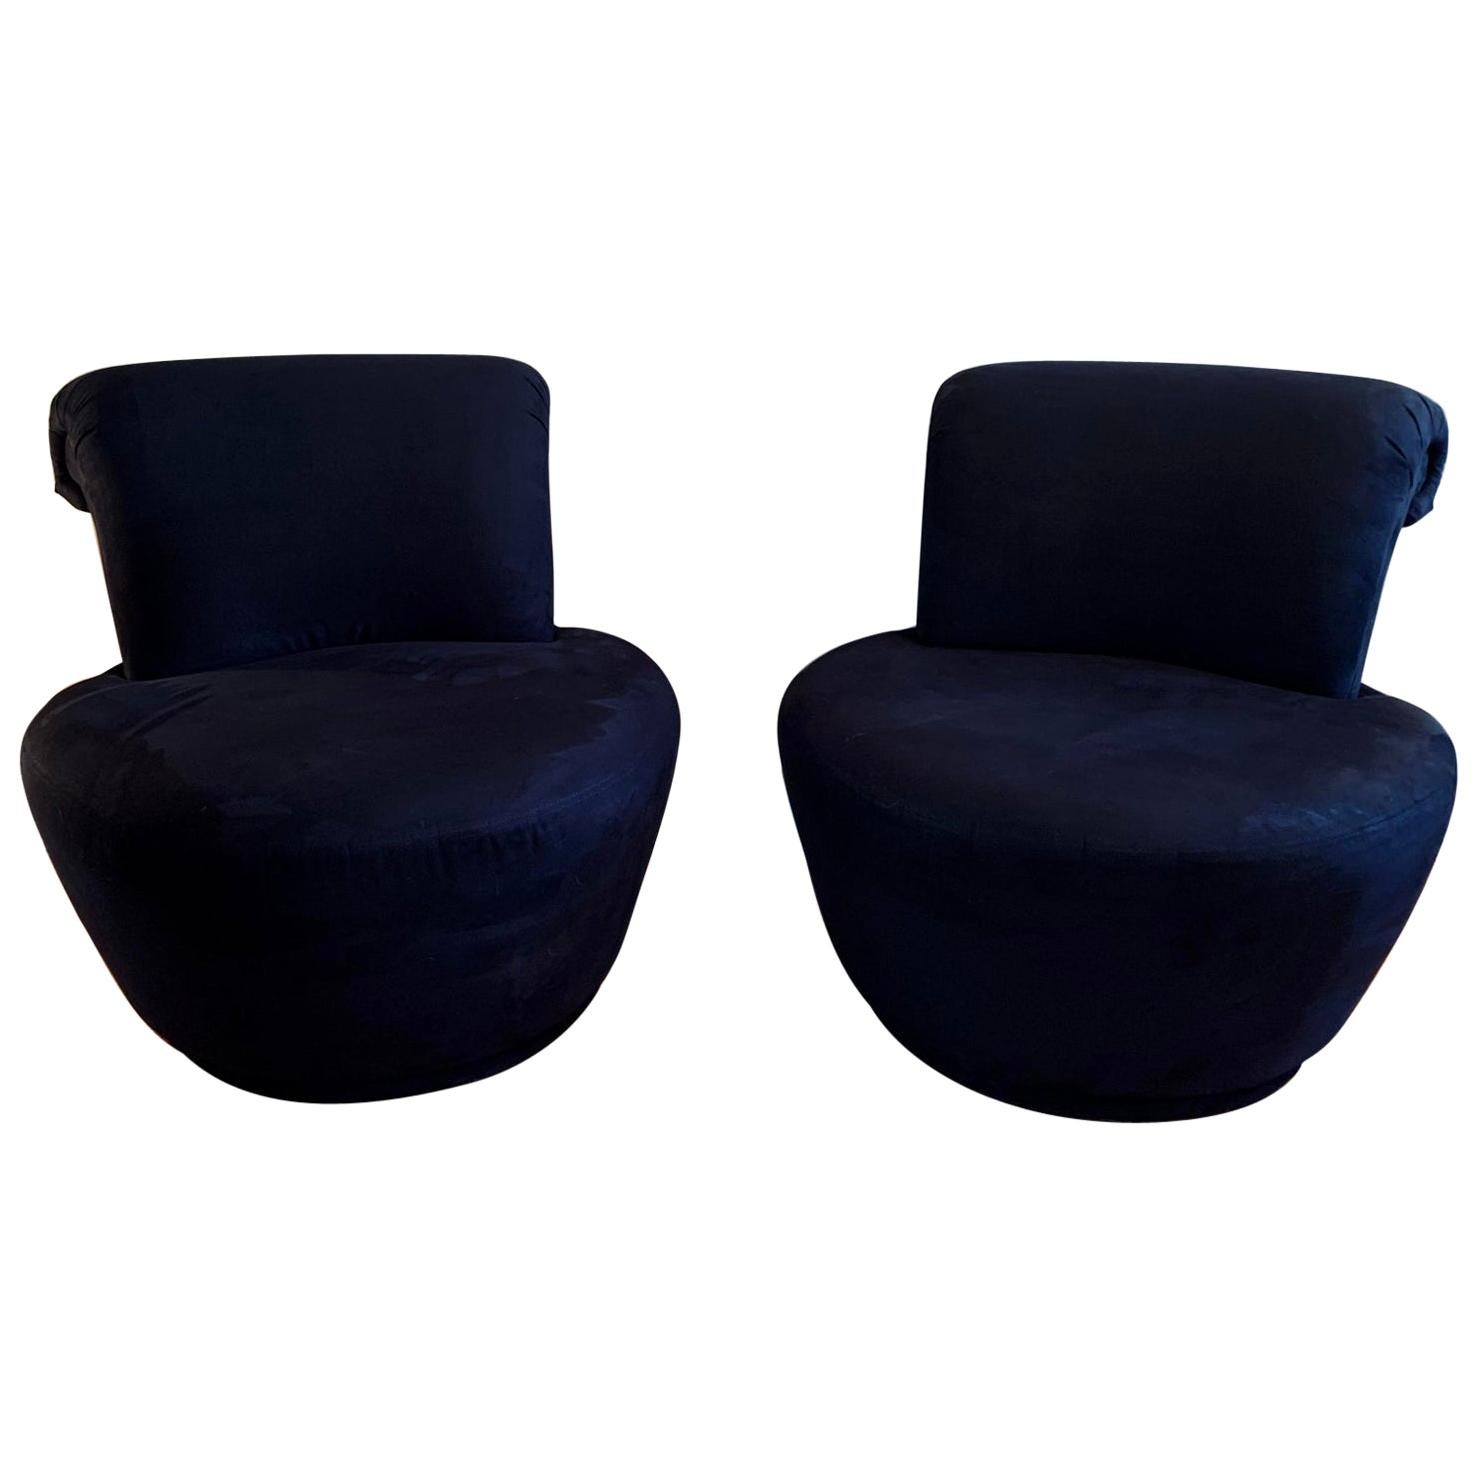 Swivel Lounge Chairs Designed by Vladimir Kagan for Weiman, Pair